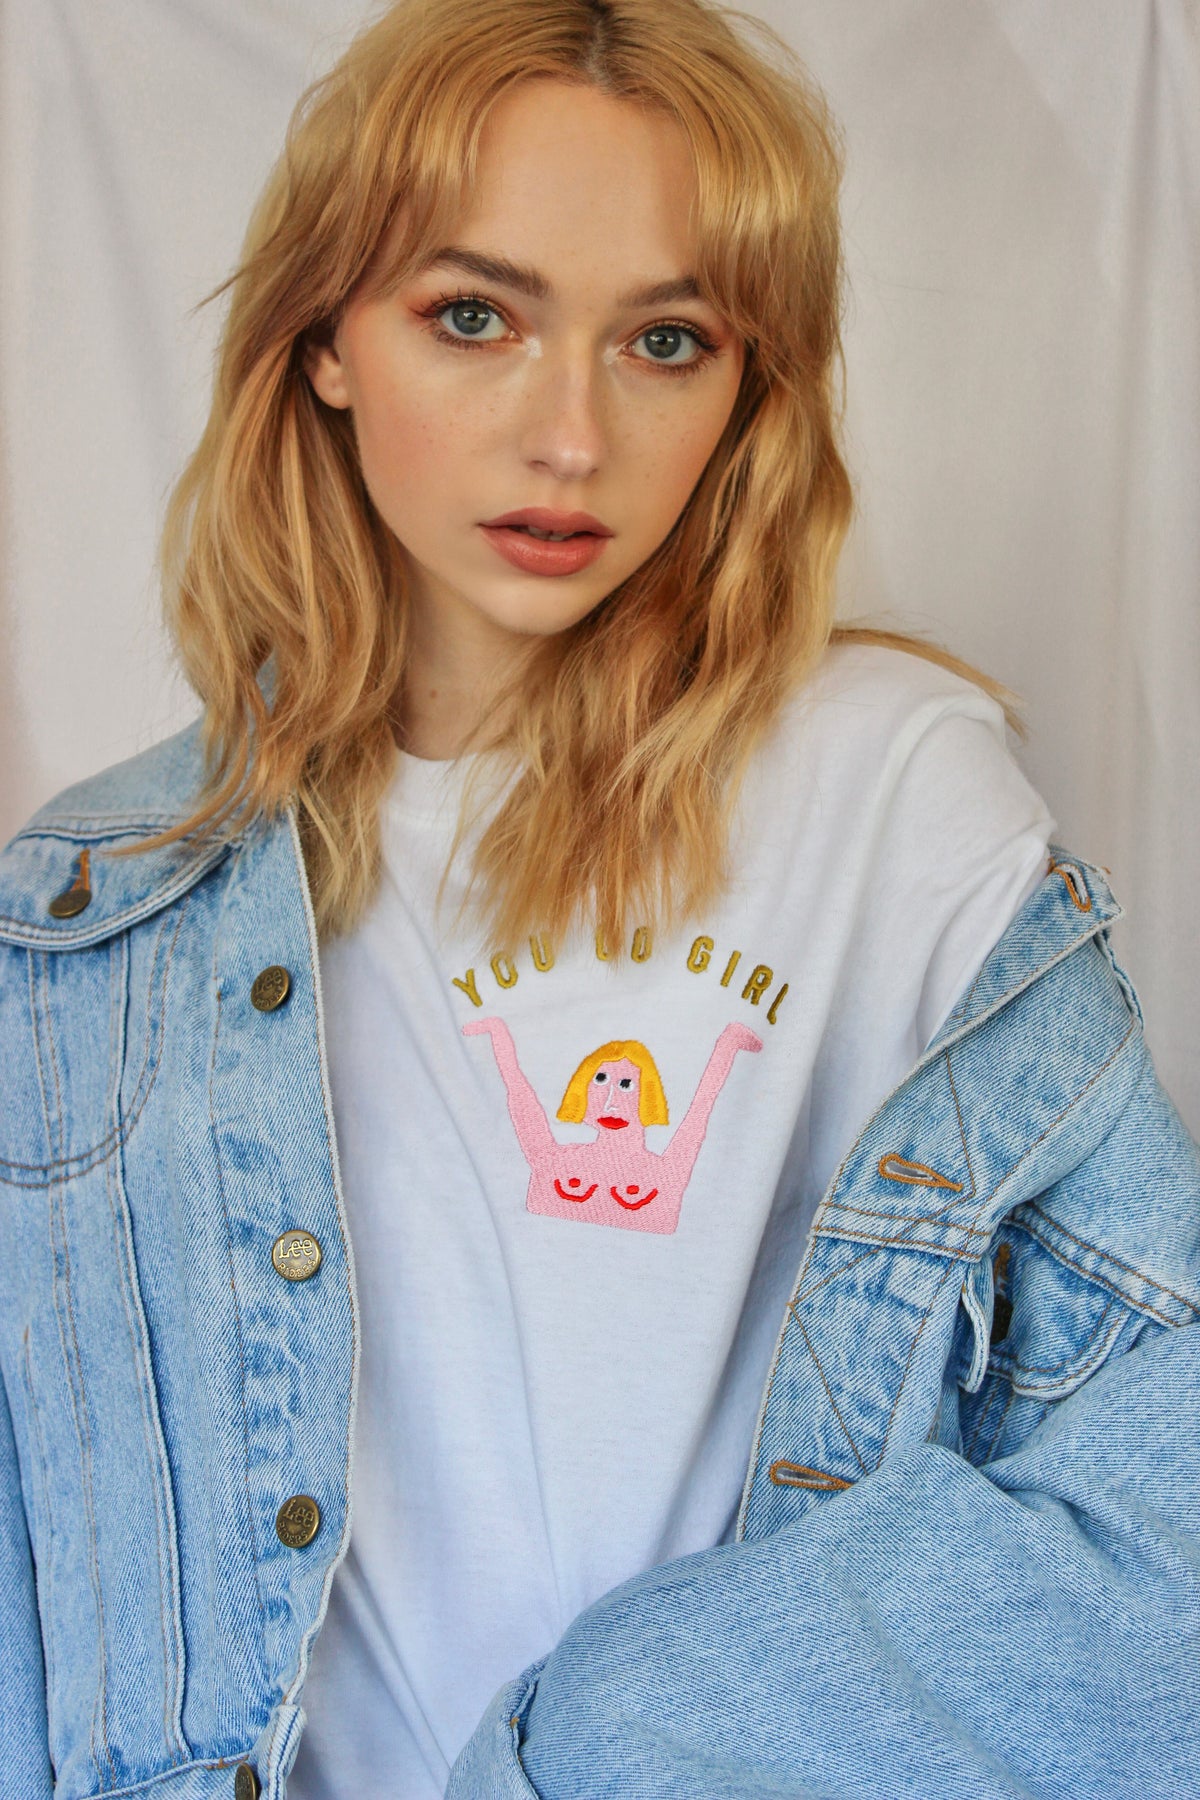 You Go Girl Embroidered T-Shirt